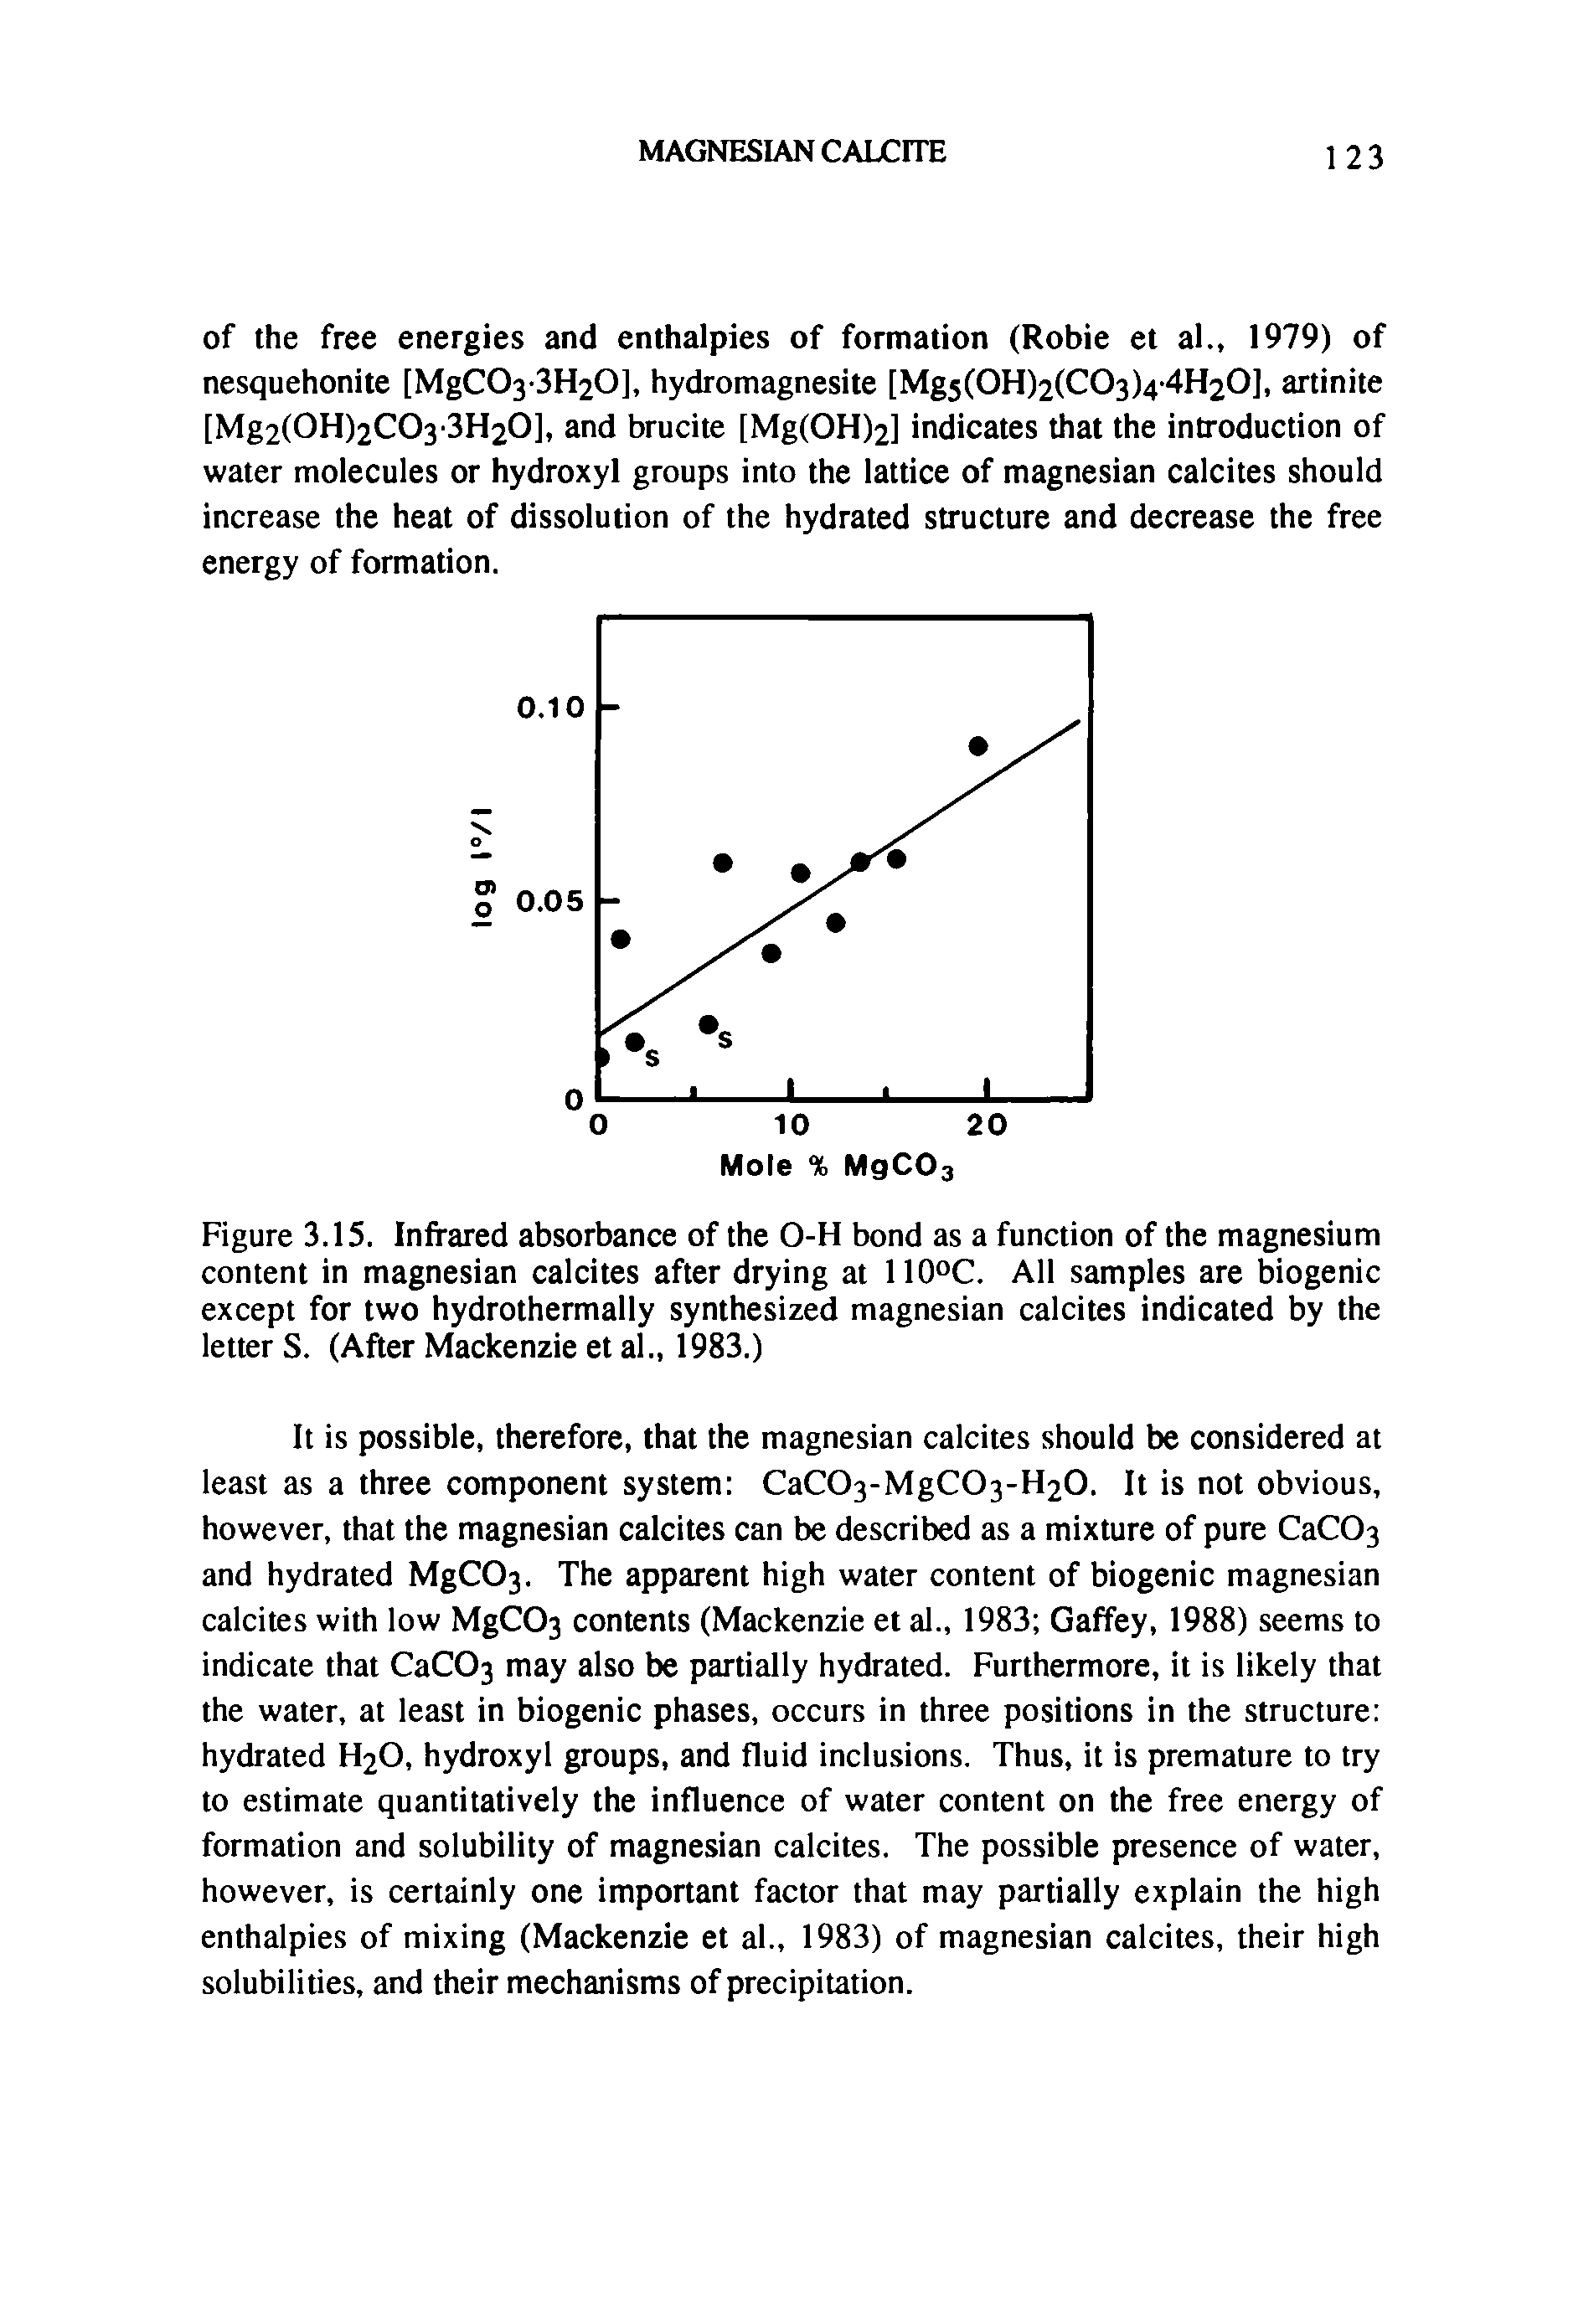 Figure 3.15. Infrared absorbance of the O-H bond as a function of the magnesium content in magnesian calcites after drying at 110°C. All samples are biogenic except for two hydrothermally synthesized magnesian calcites indicated by the letter S. (After Mackenzie et al., 1983.)...